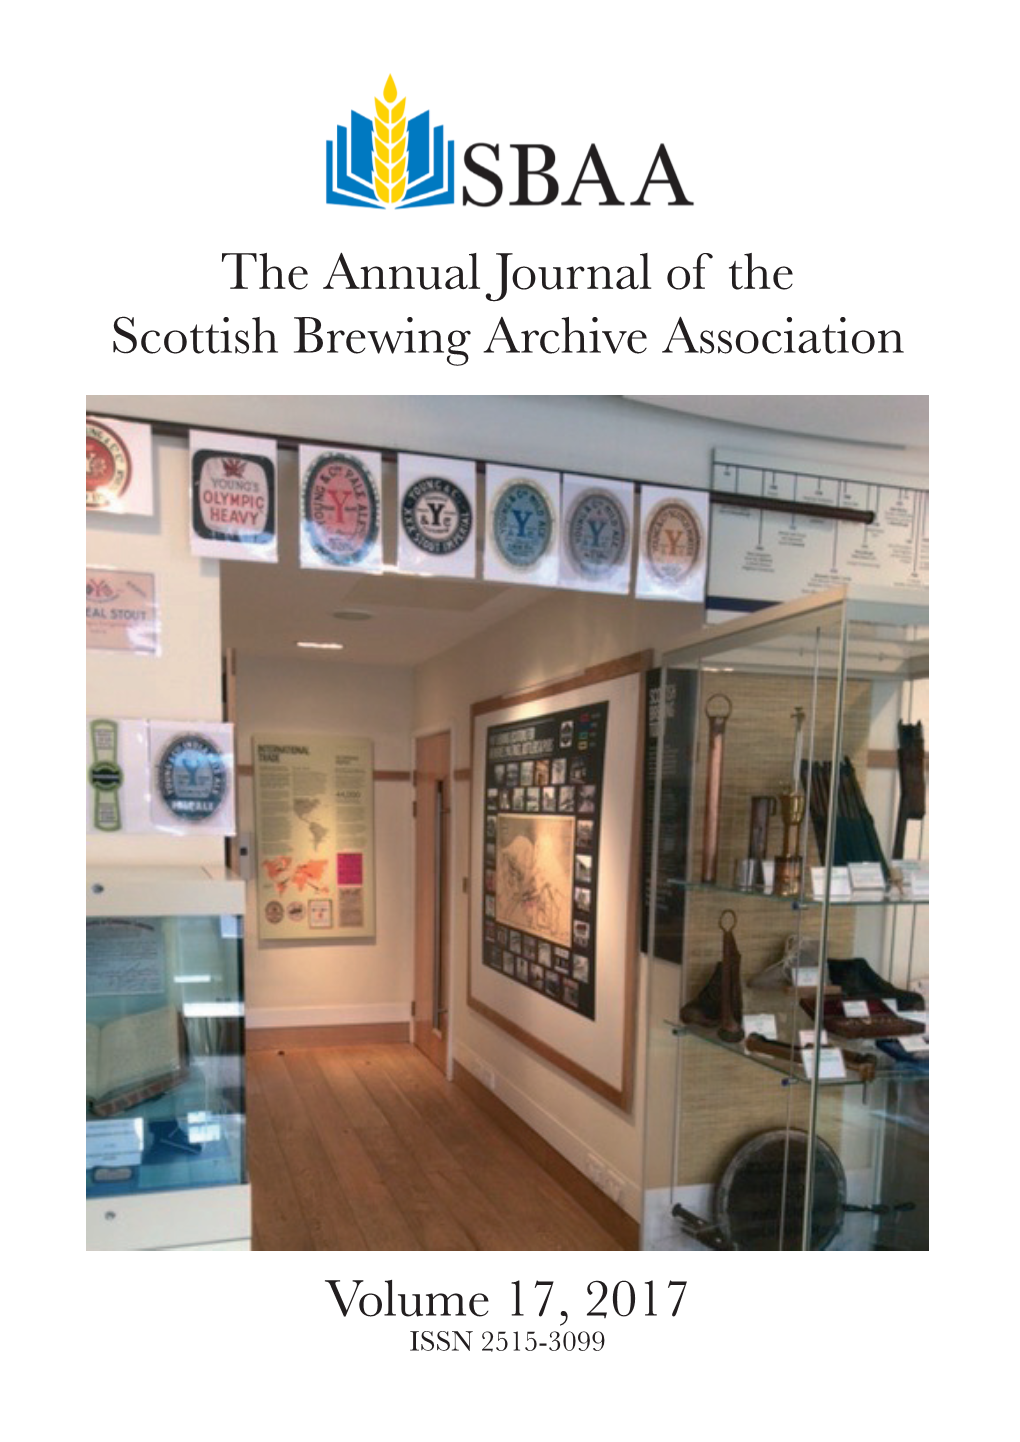 The Annual Journal of the Scottish Brewing Archive Association